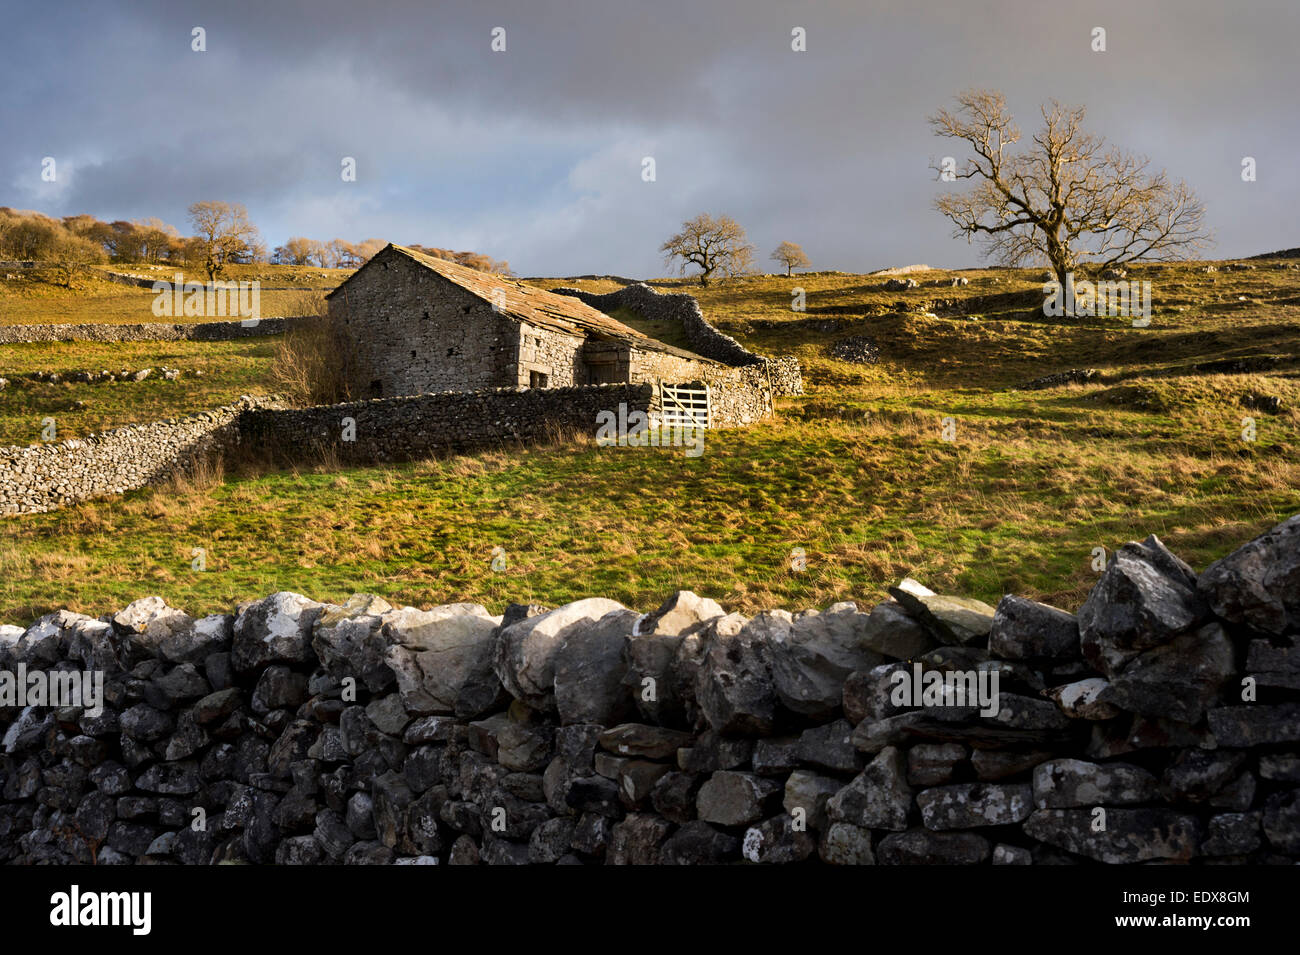 A Dales barn and dry stone walls in winter sunlight, Langcliffe, Settle, Yorkshire Dales National Park, UK Stock Photo